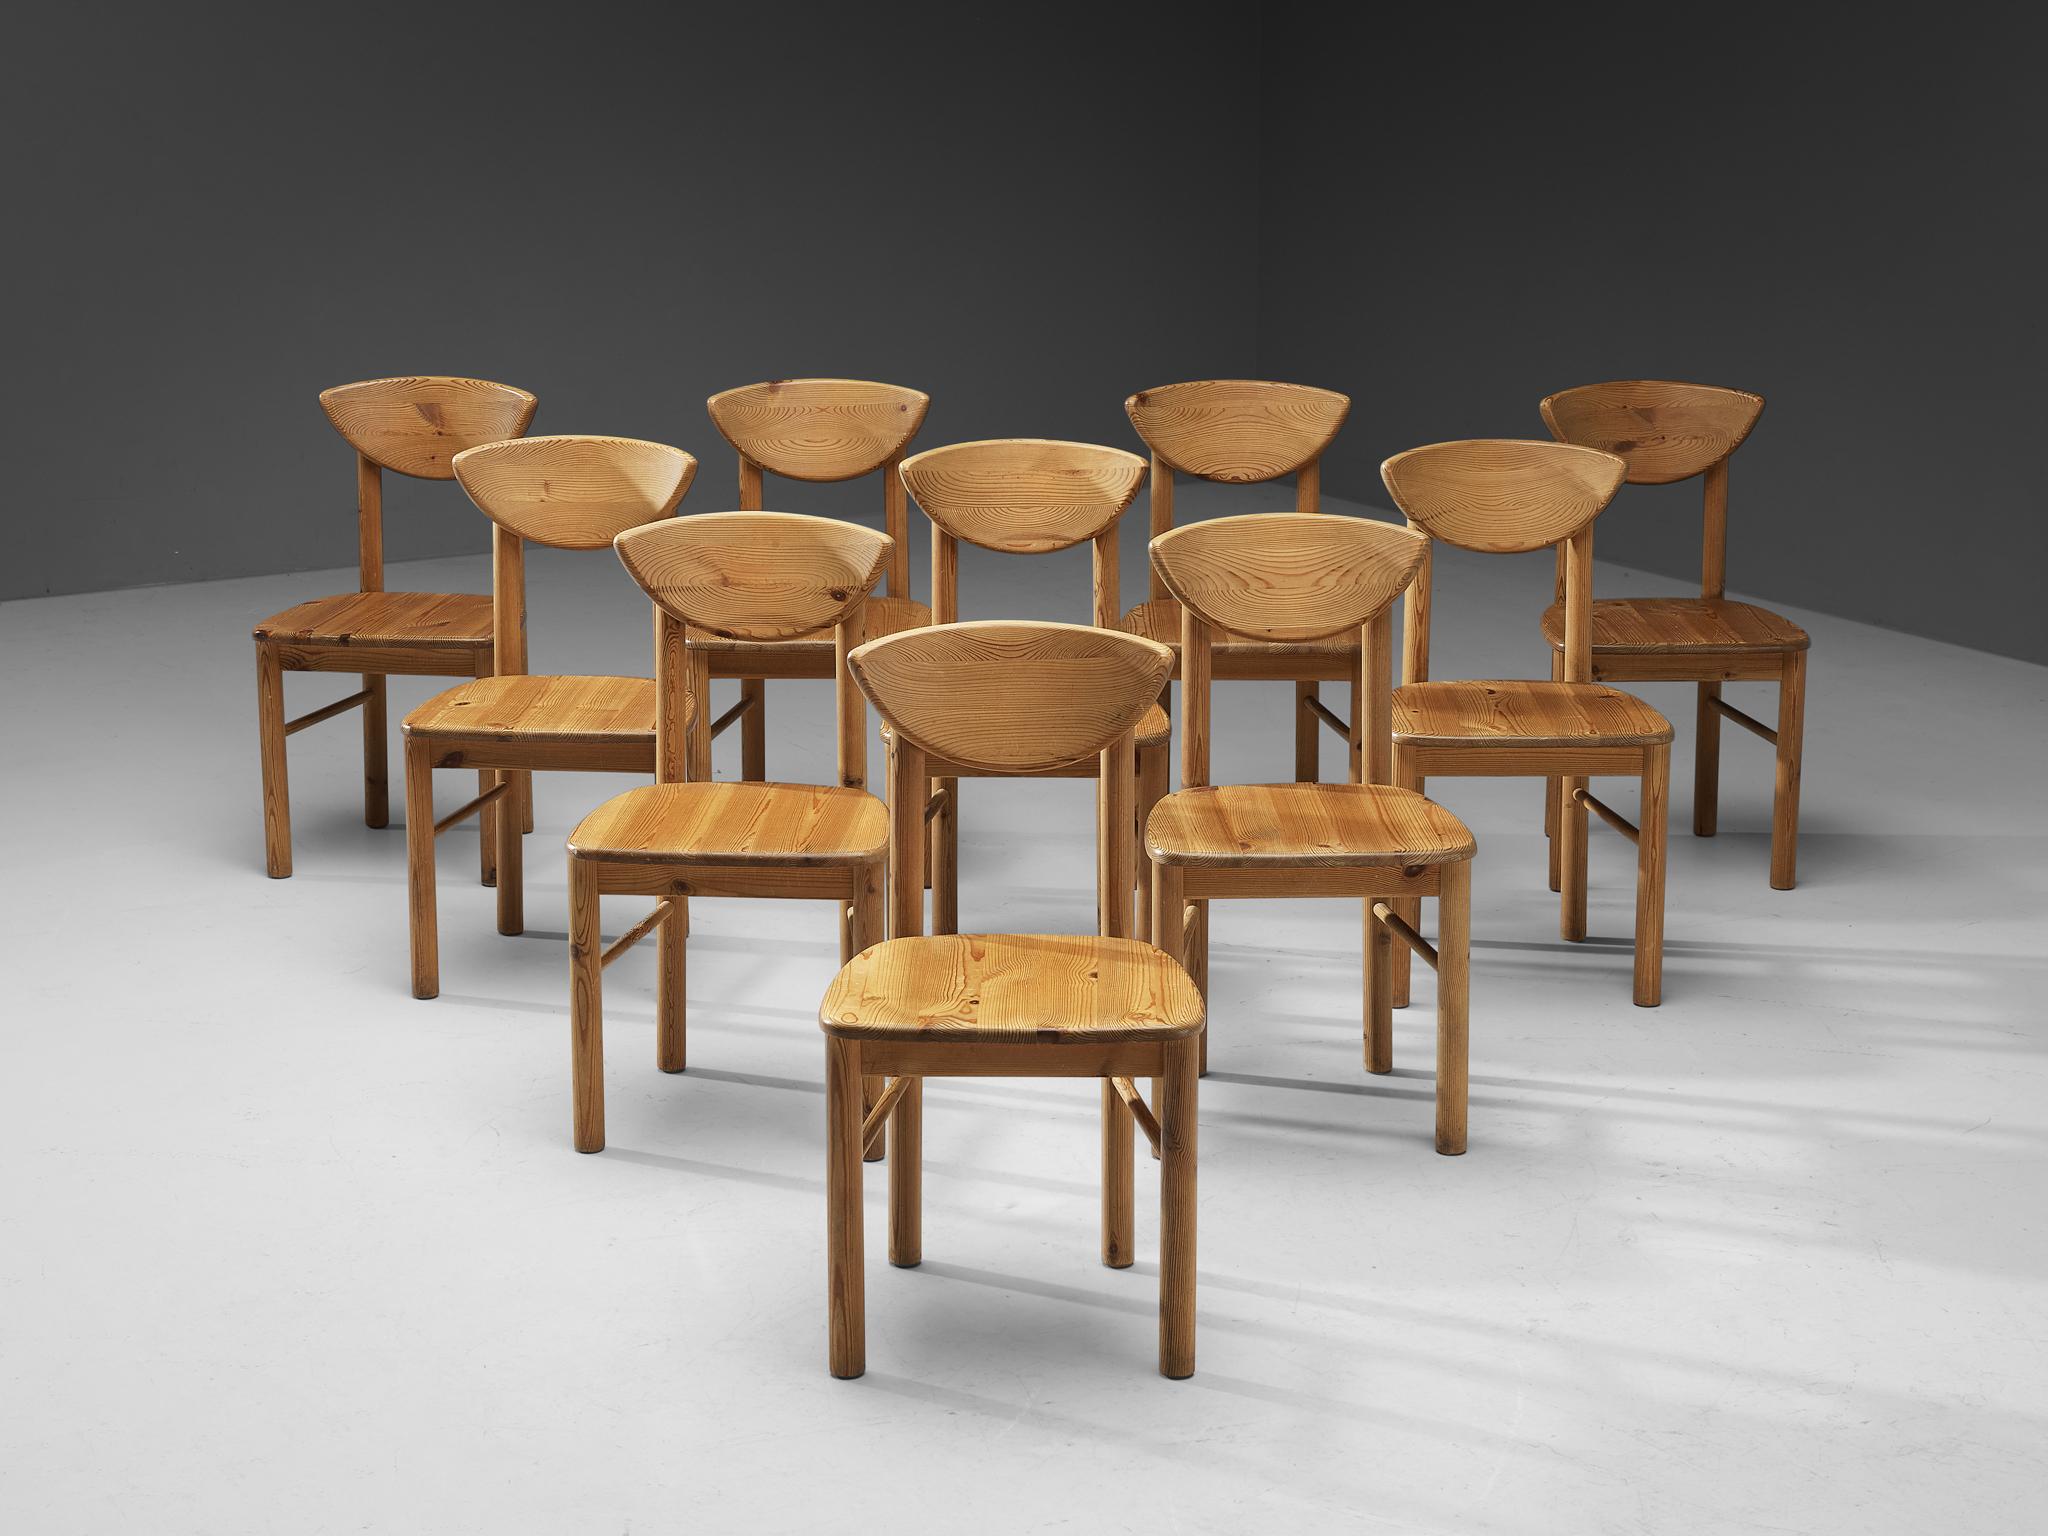 Set of ten dining chairs, pine, Denmark, 1970s. 

Set of ten beautiful, organic and natural dining chairs in solid pine. A simplistic design with a round seating and attention for the natural expression and grain of the wood. These chairs hold a